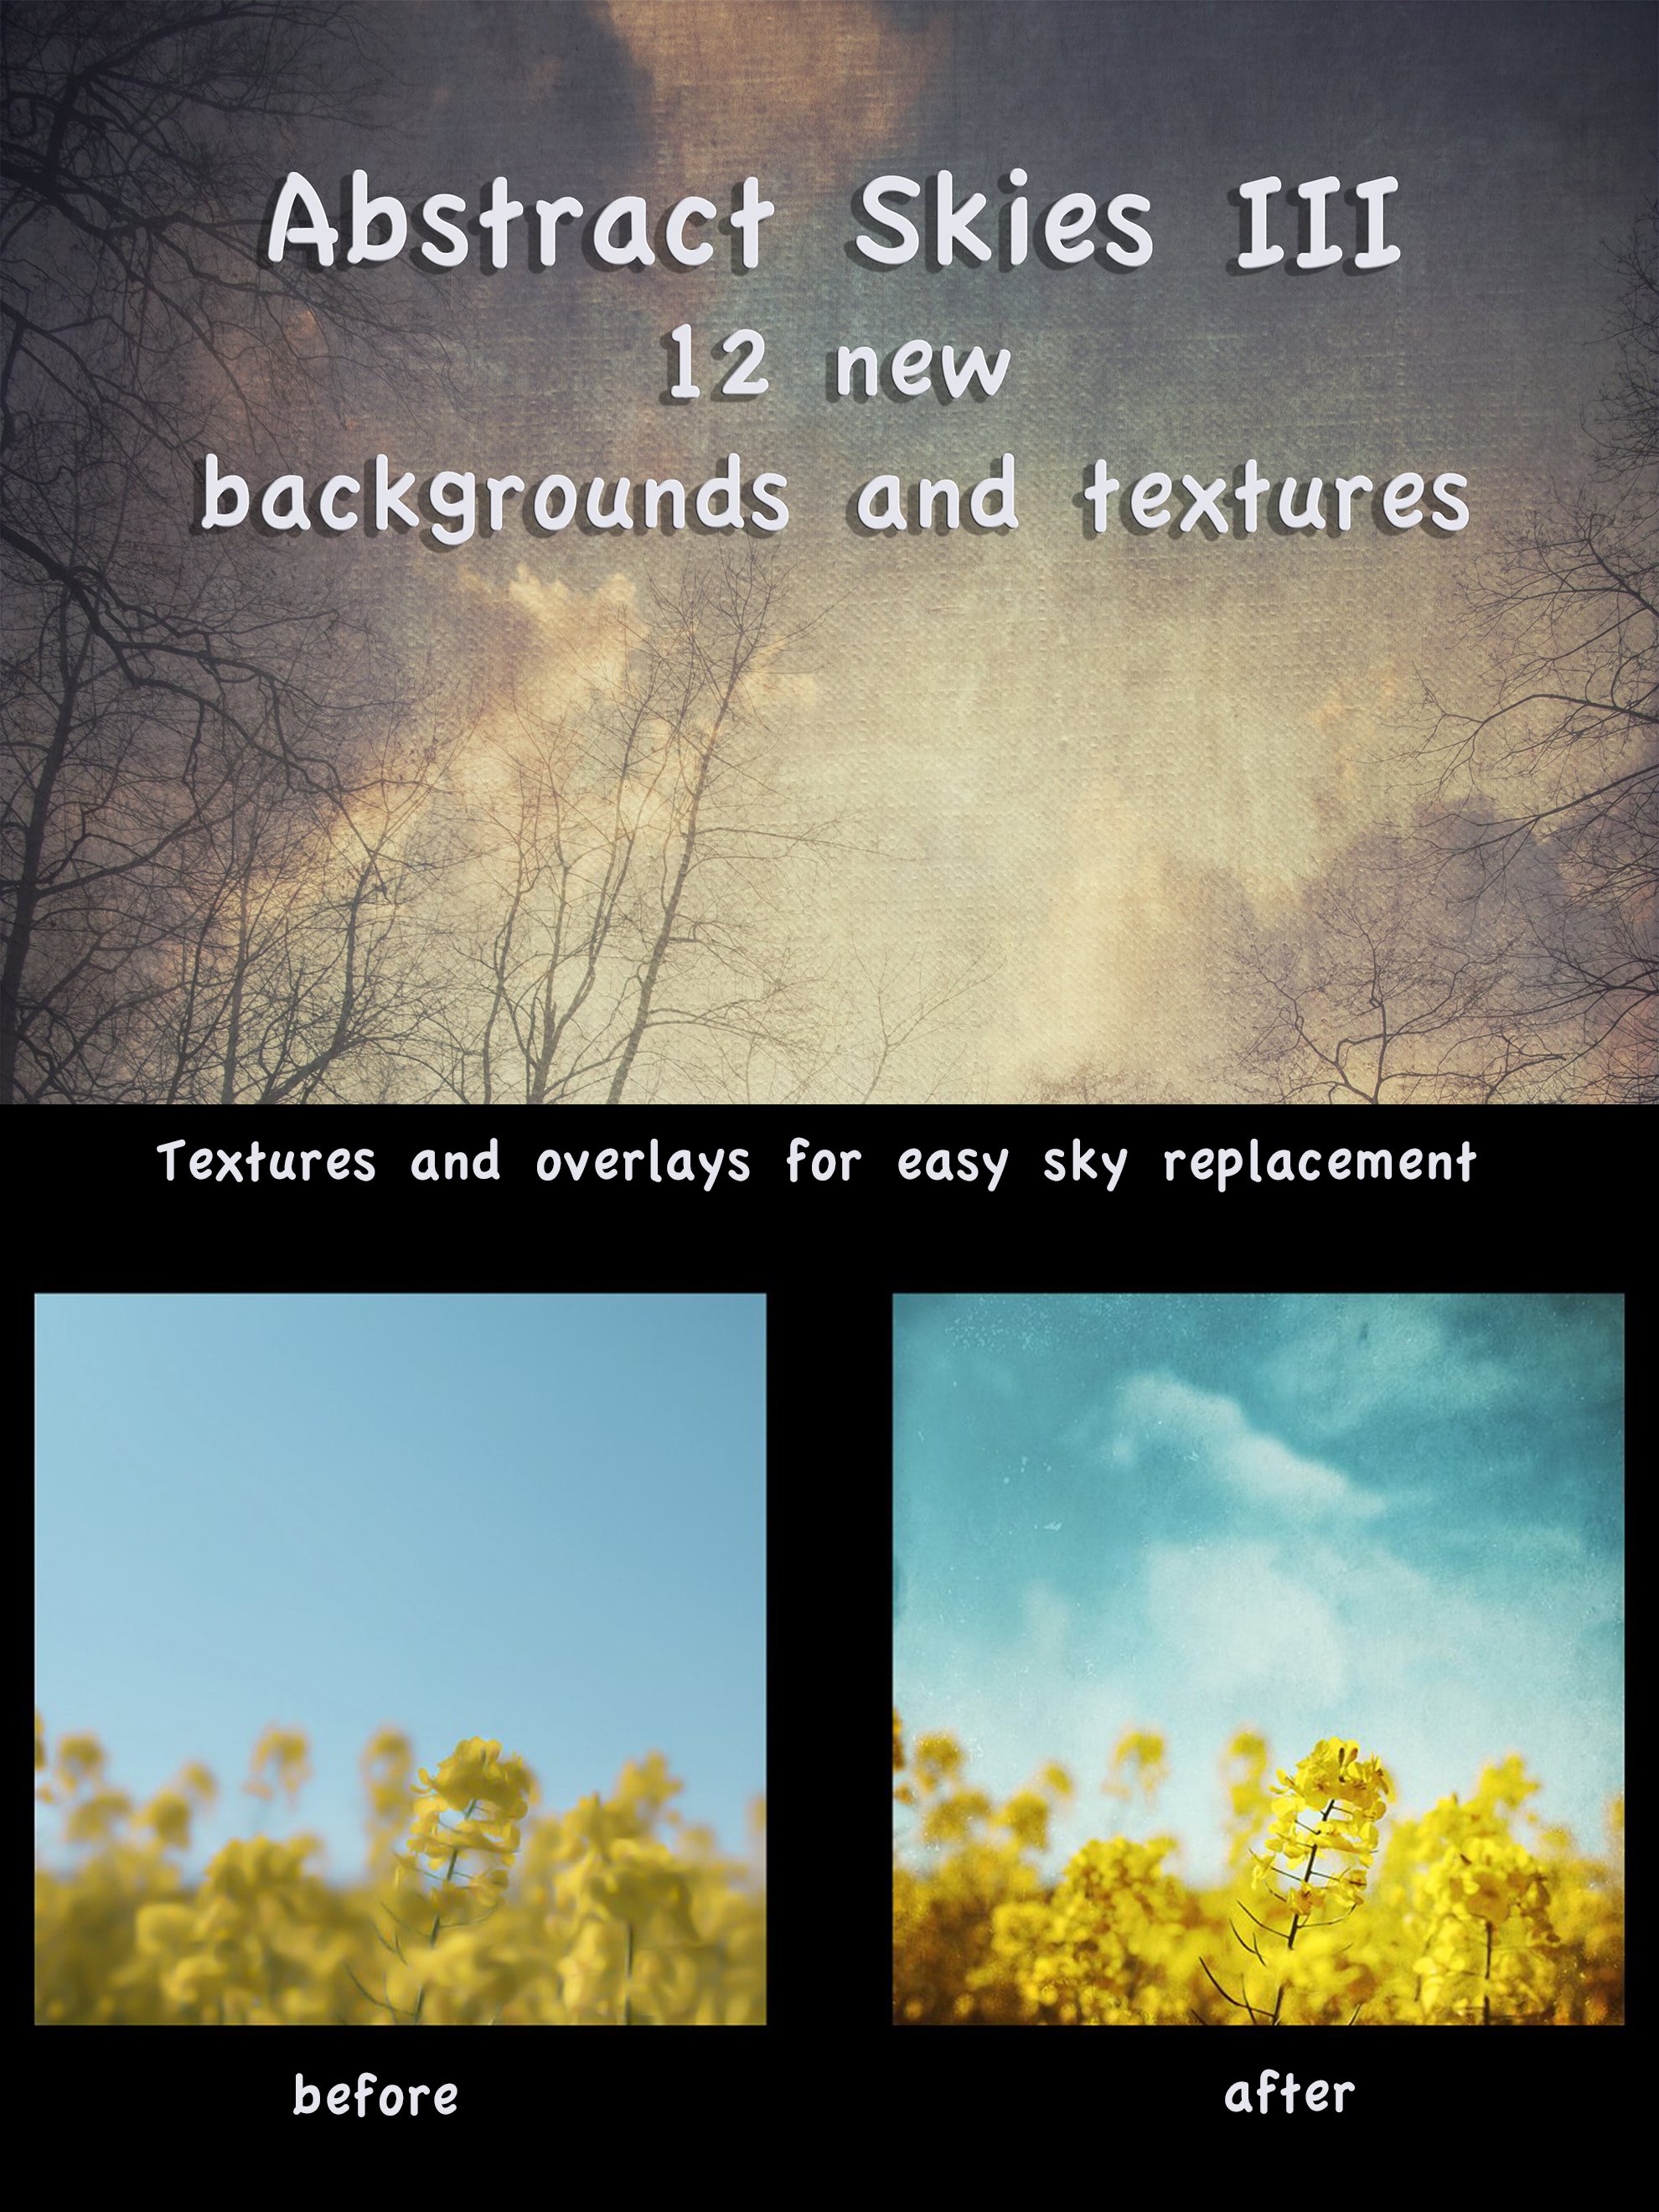 Abstract Skies III Textures cover image.